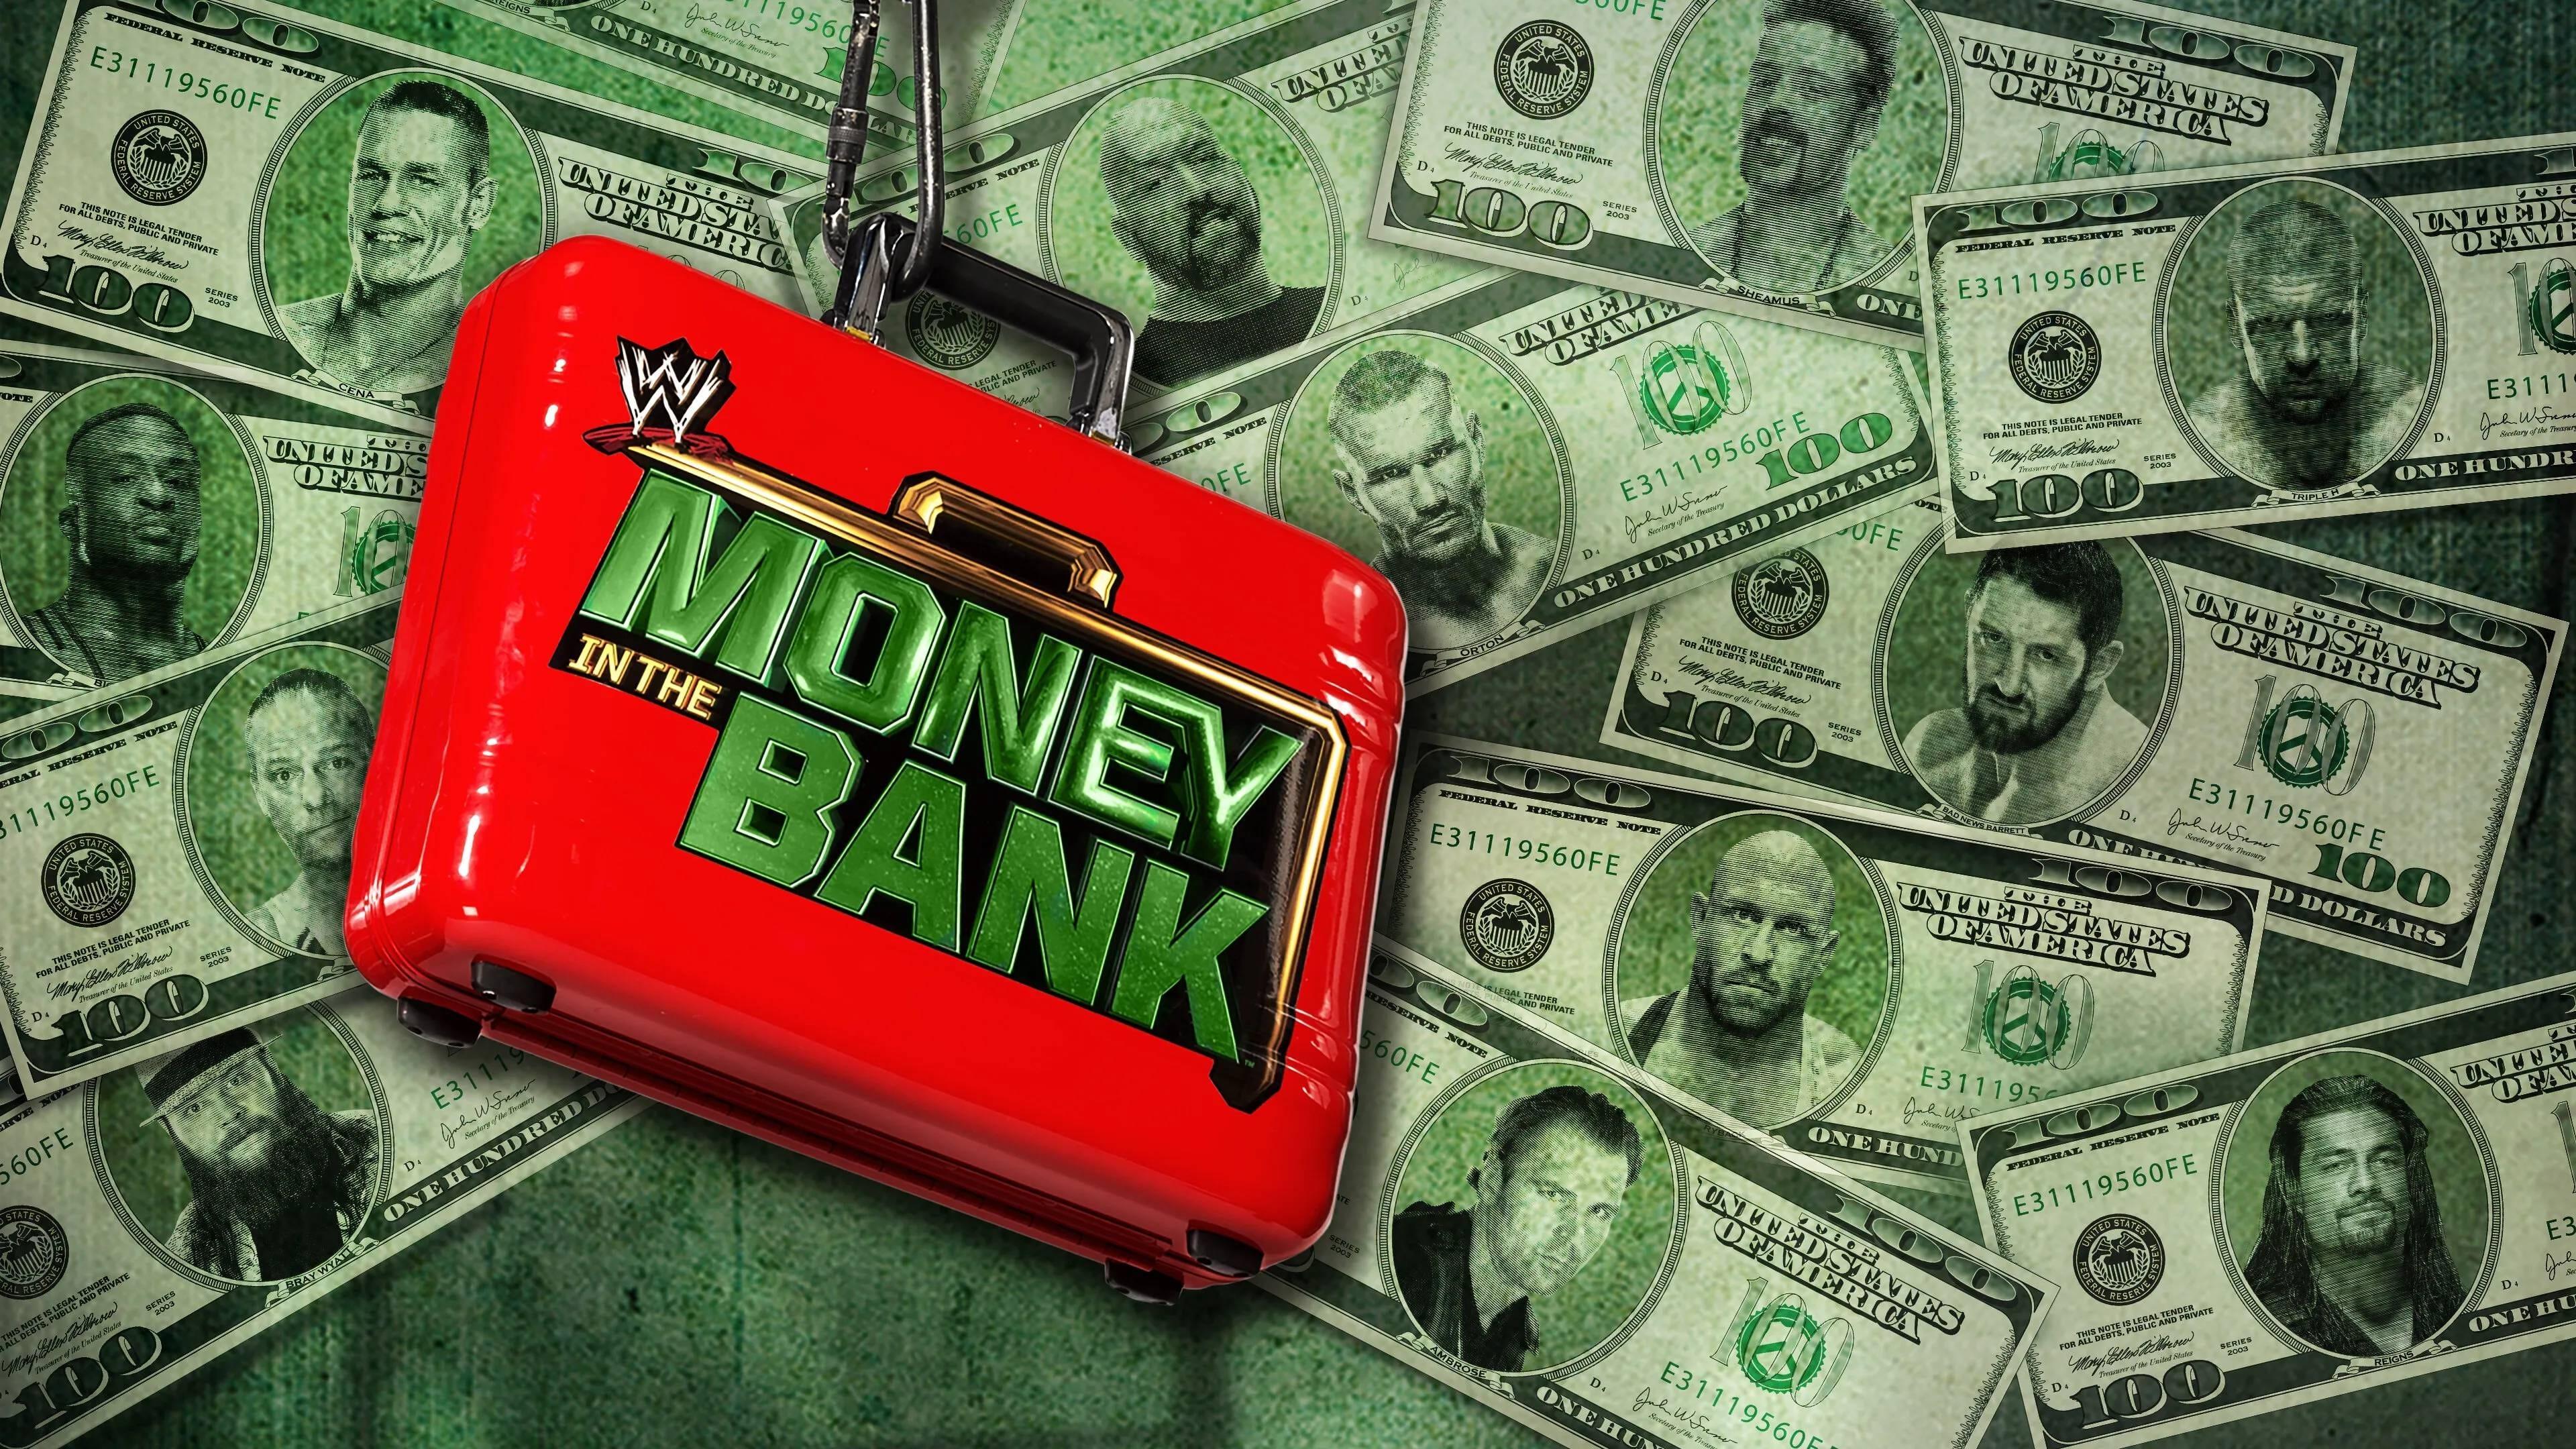 WWE Money in the Bank 2014 backdrop